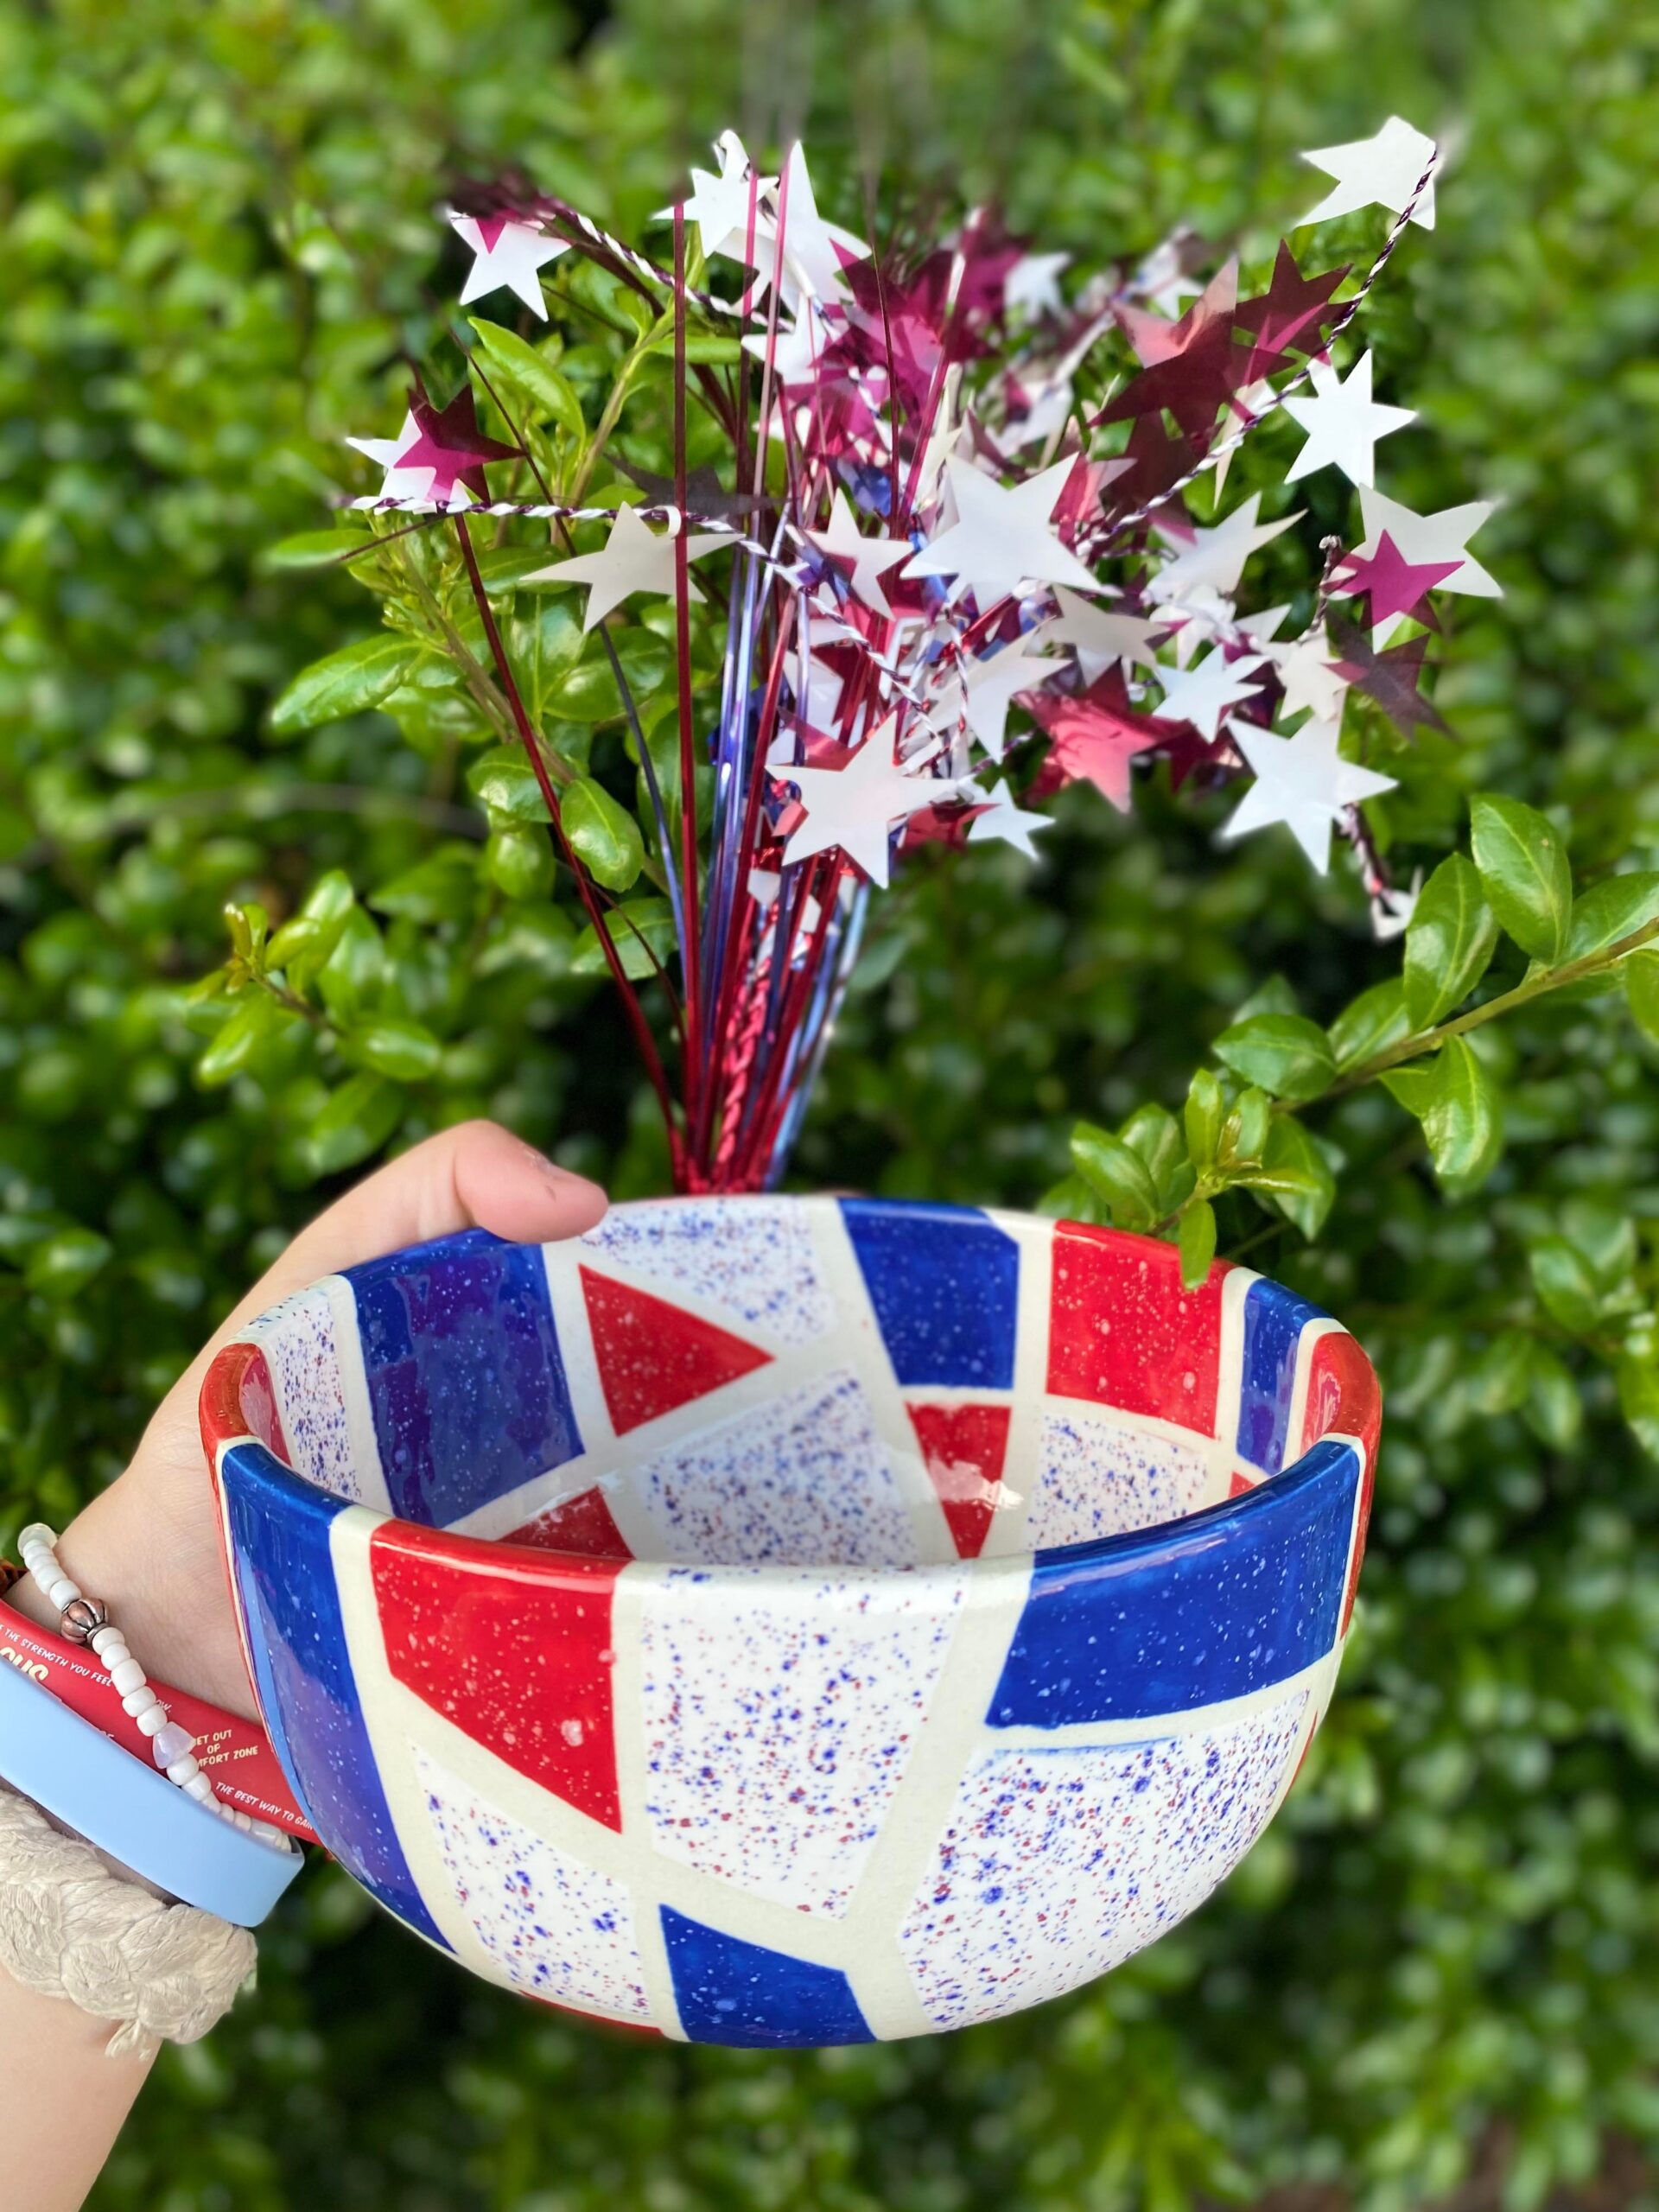 A person holding a bowl with red, white and blue designs on it.